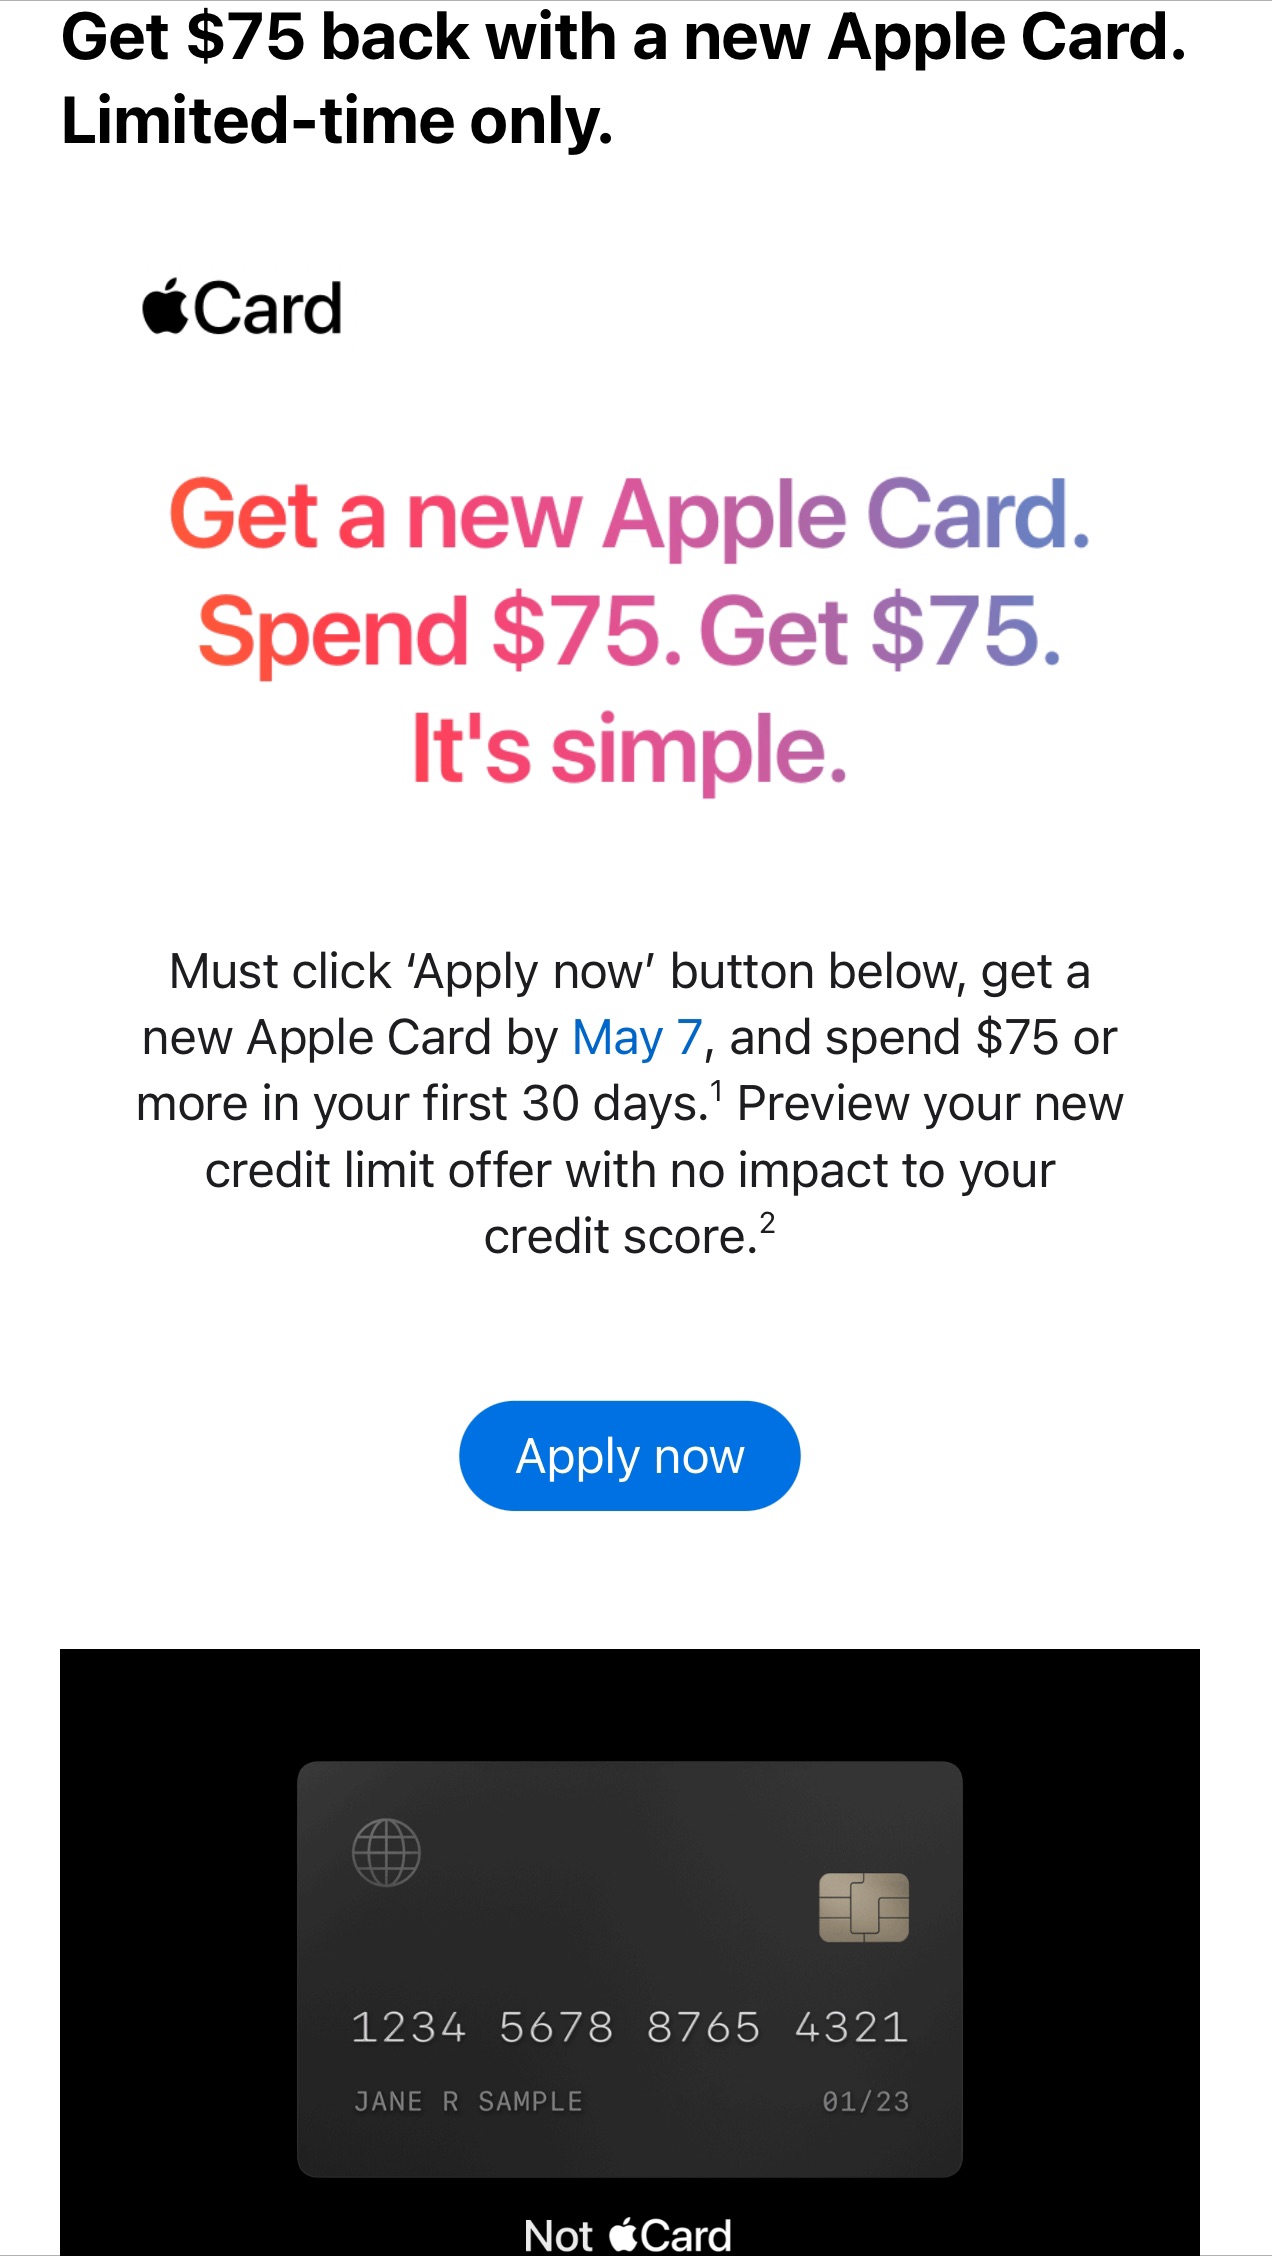 Get $75 back with a new Apple Card